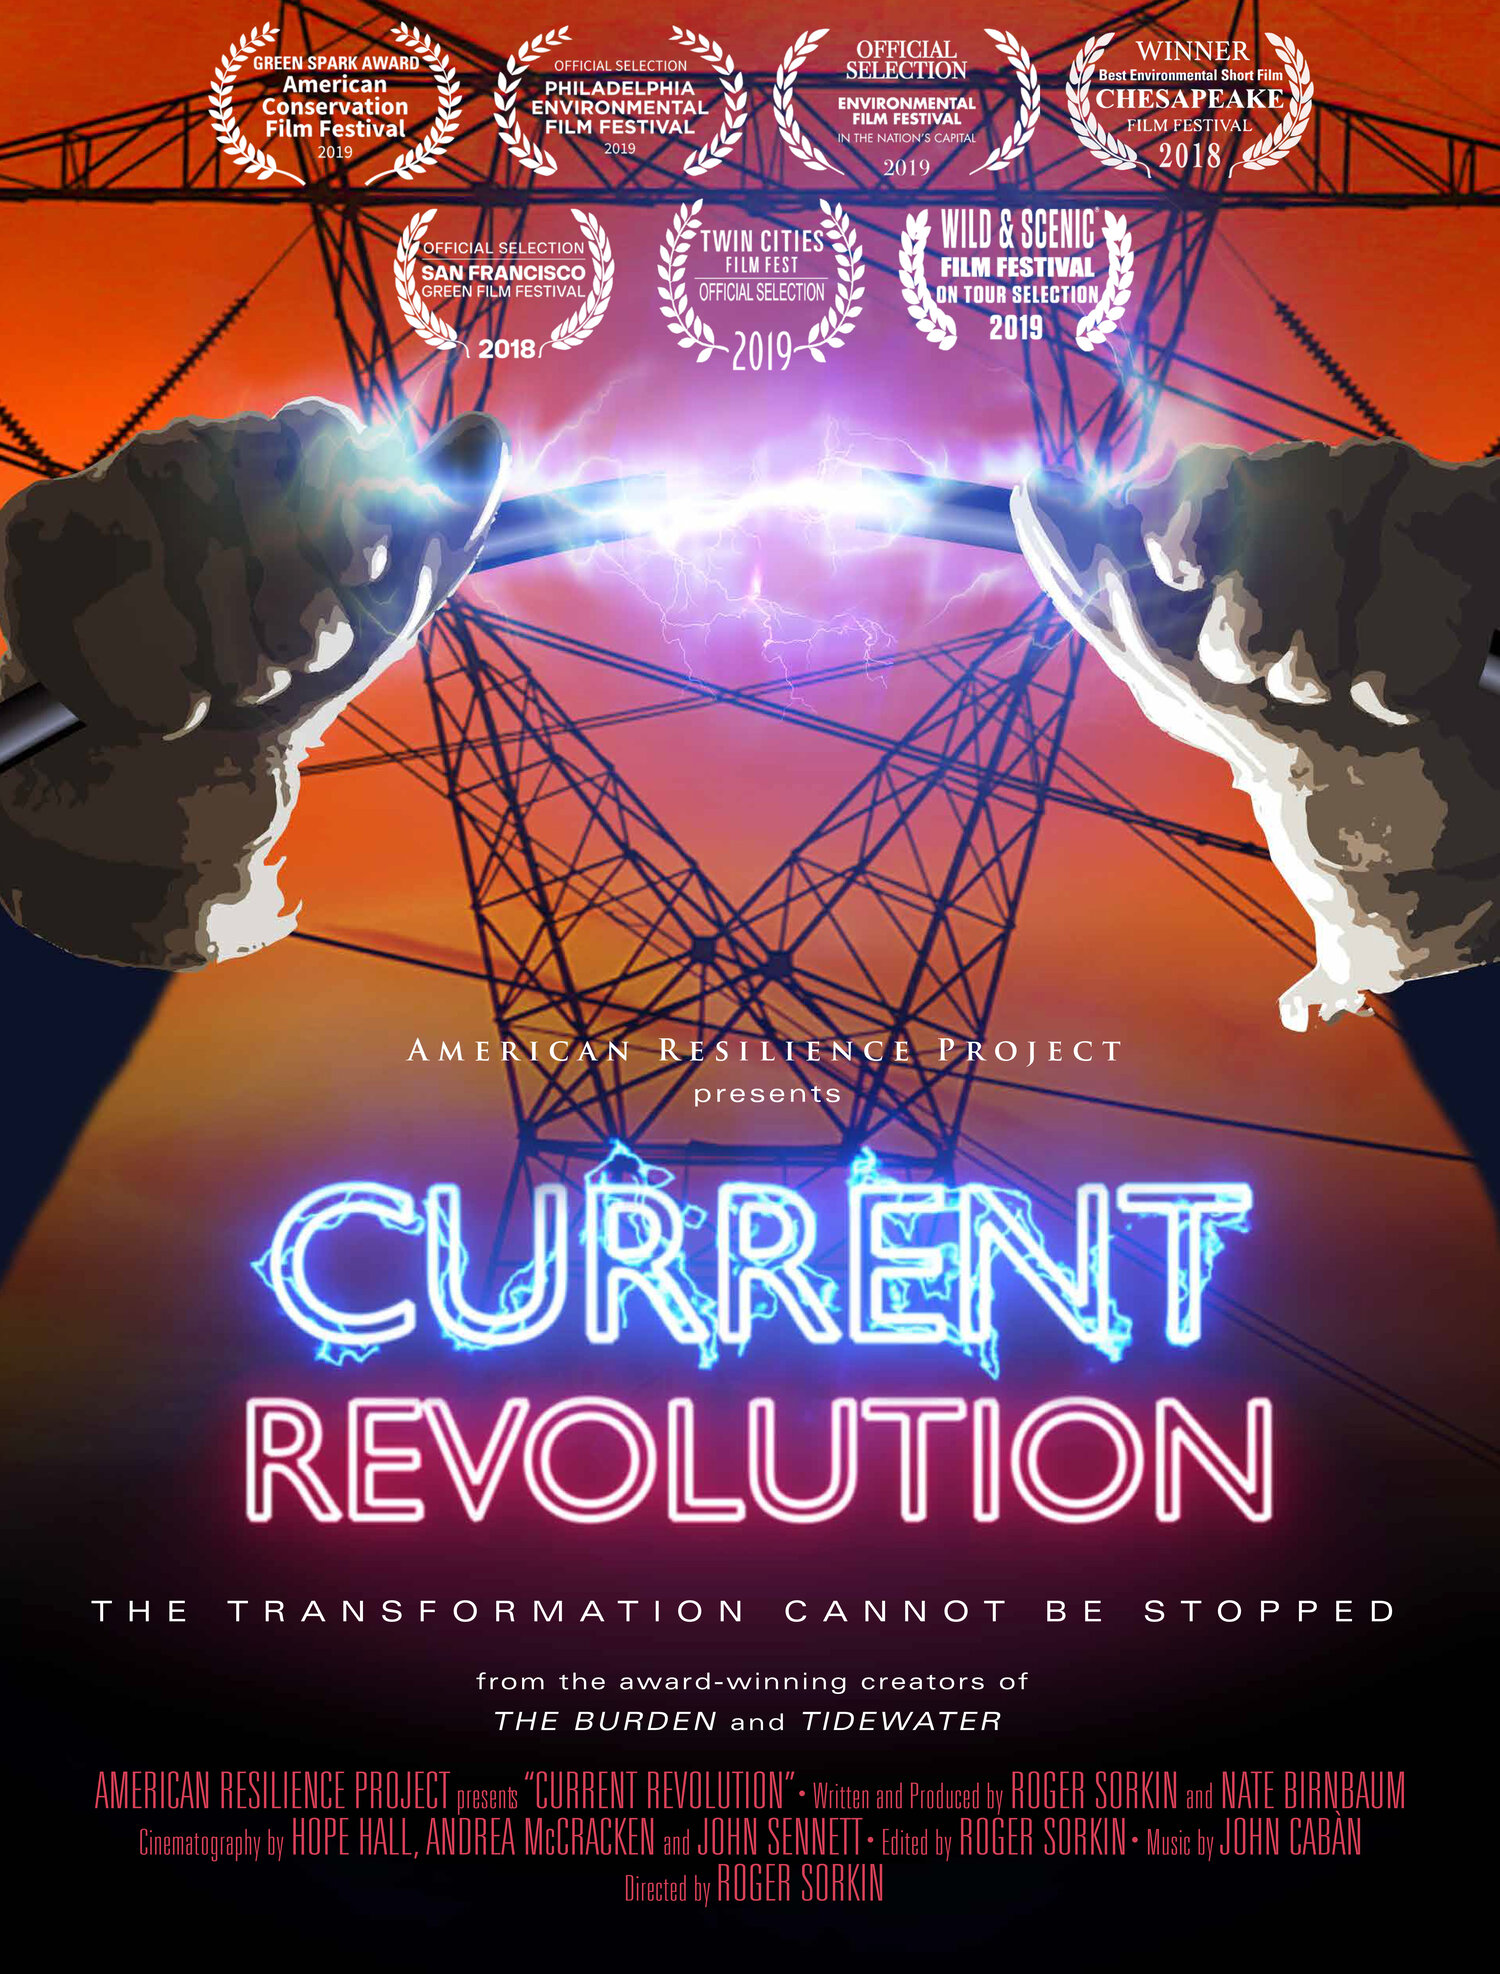 movie poster with hands holding electric wire and power transformer in the background